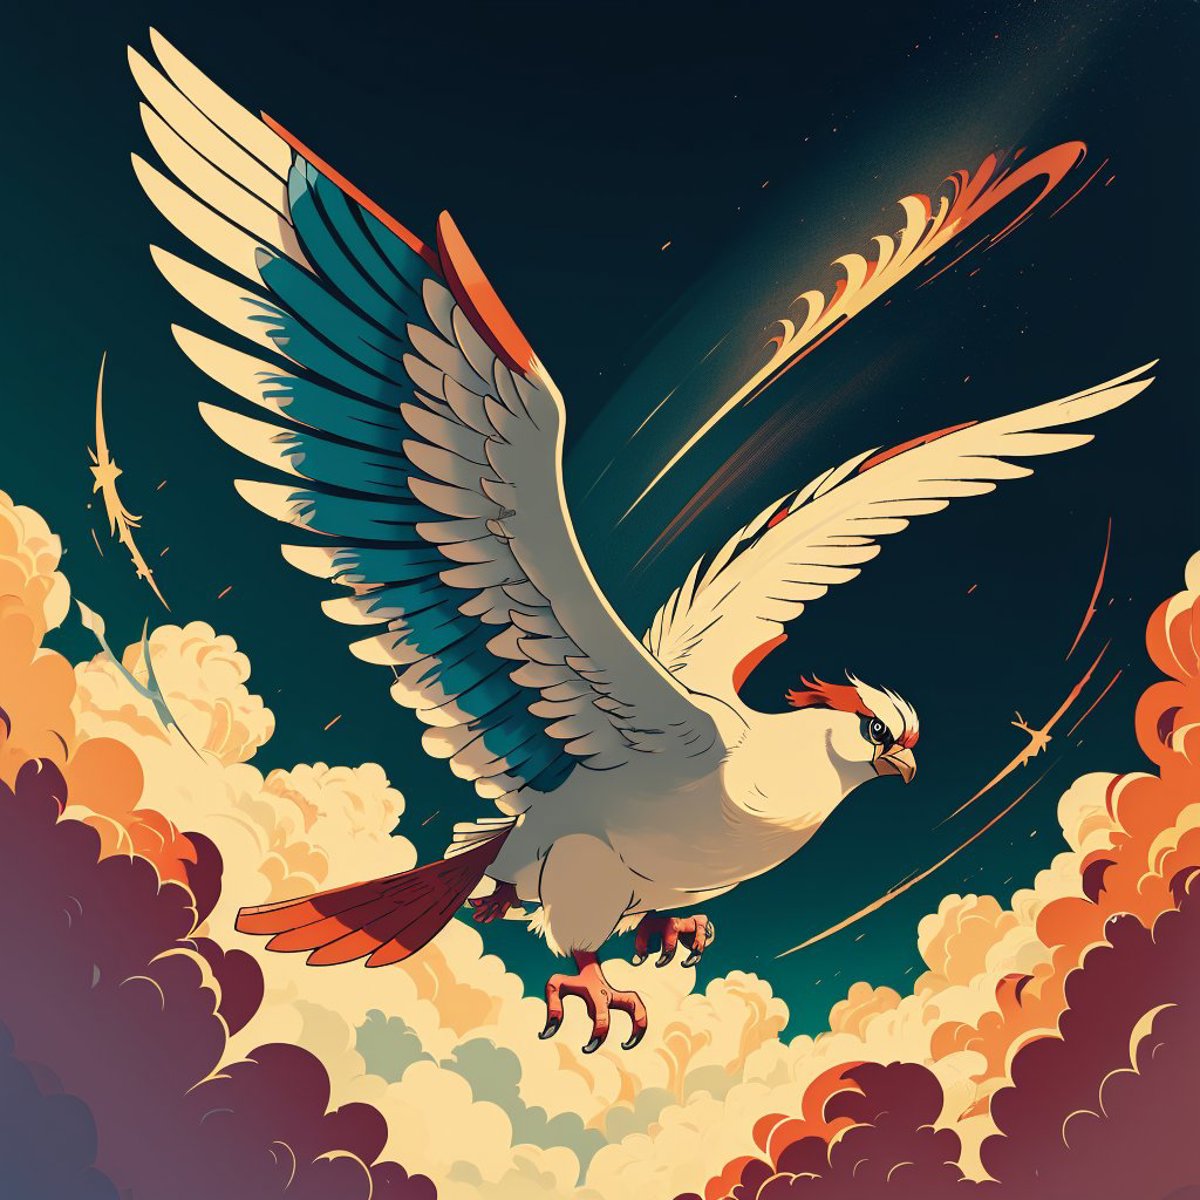 A large white bird with red and blue wings, flying through the sky.